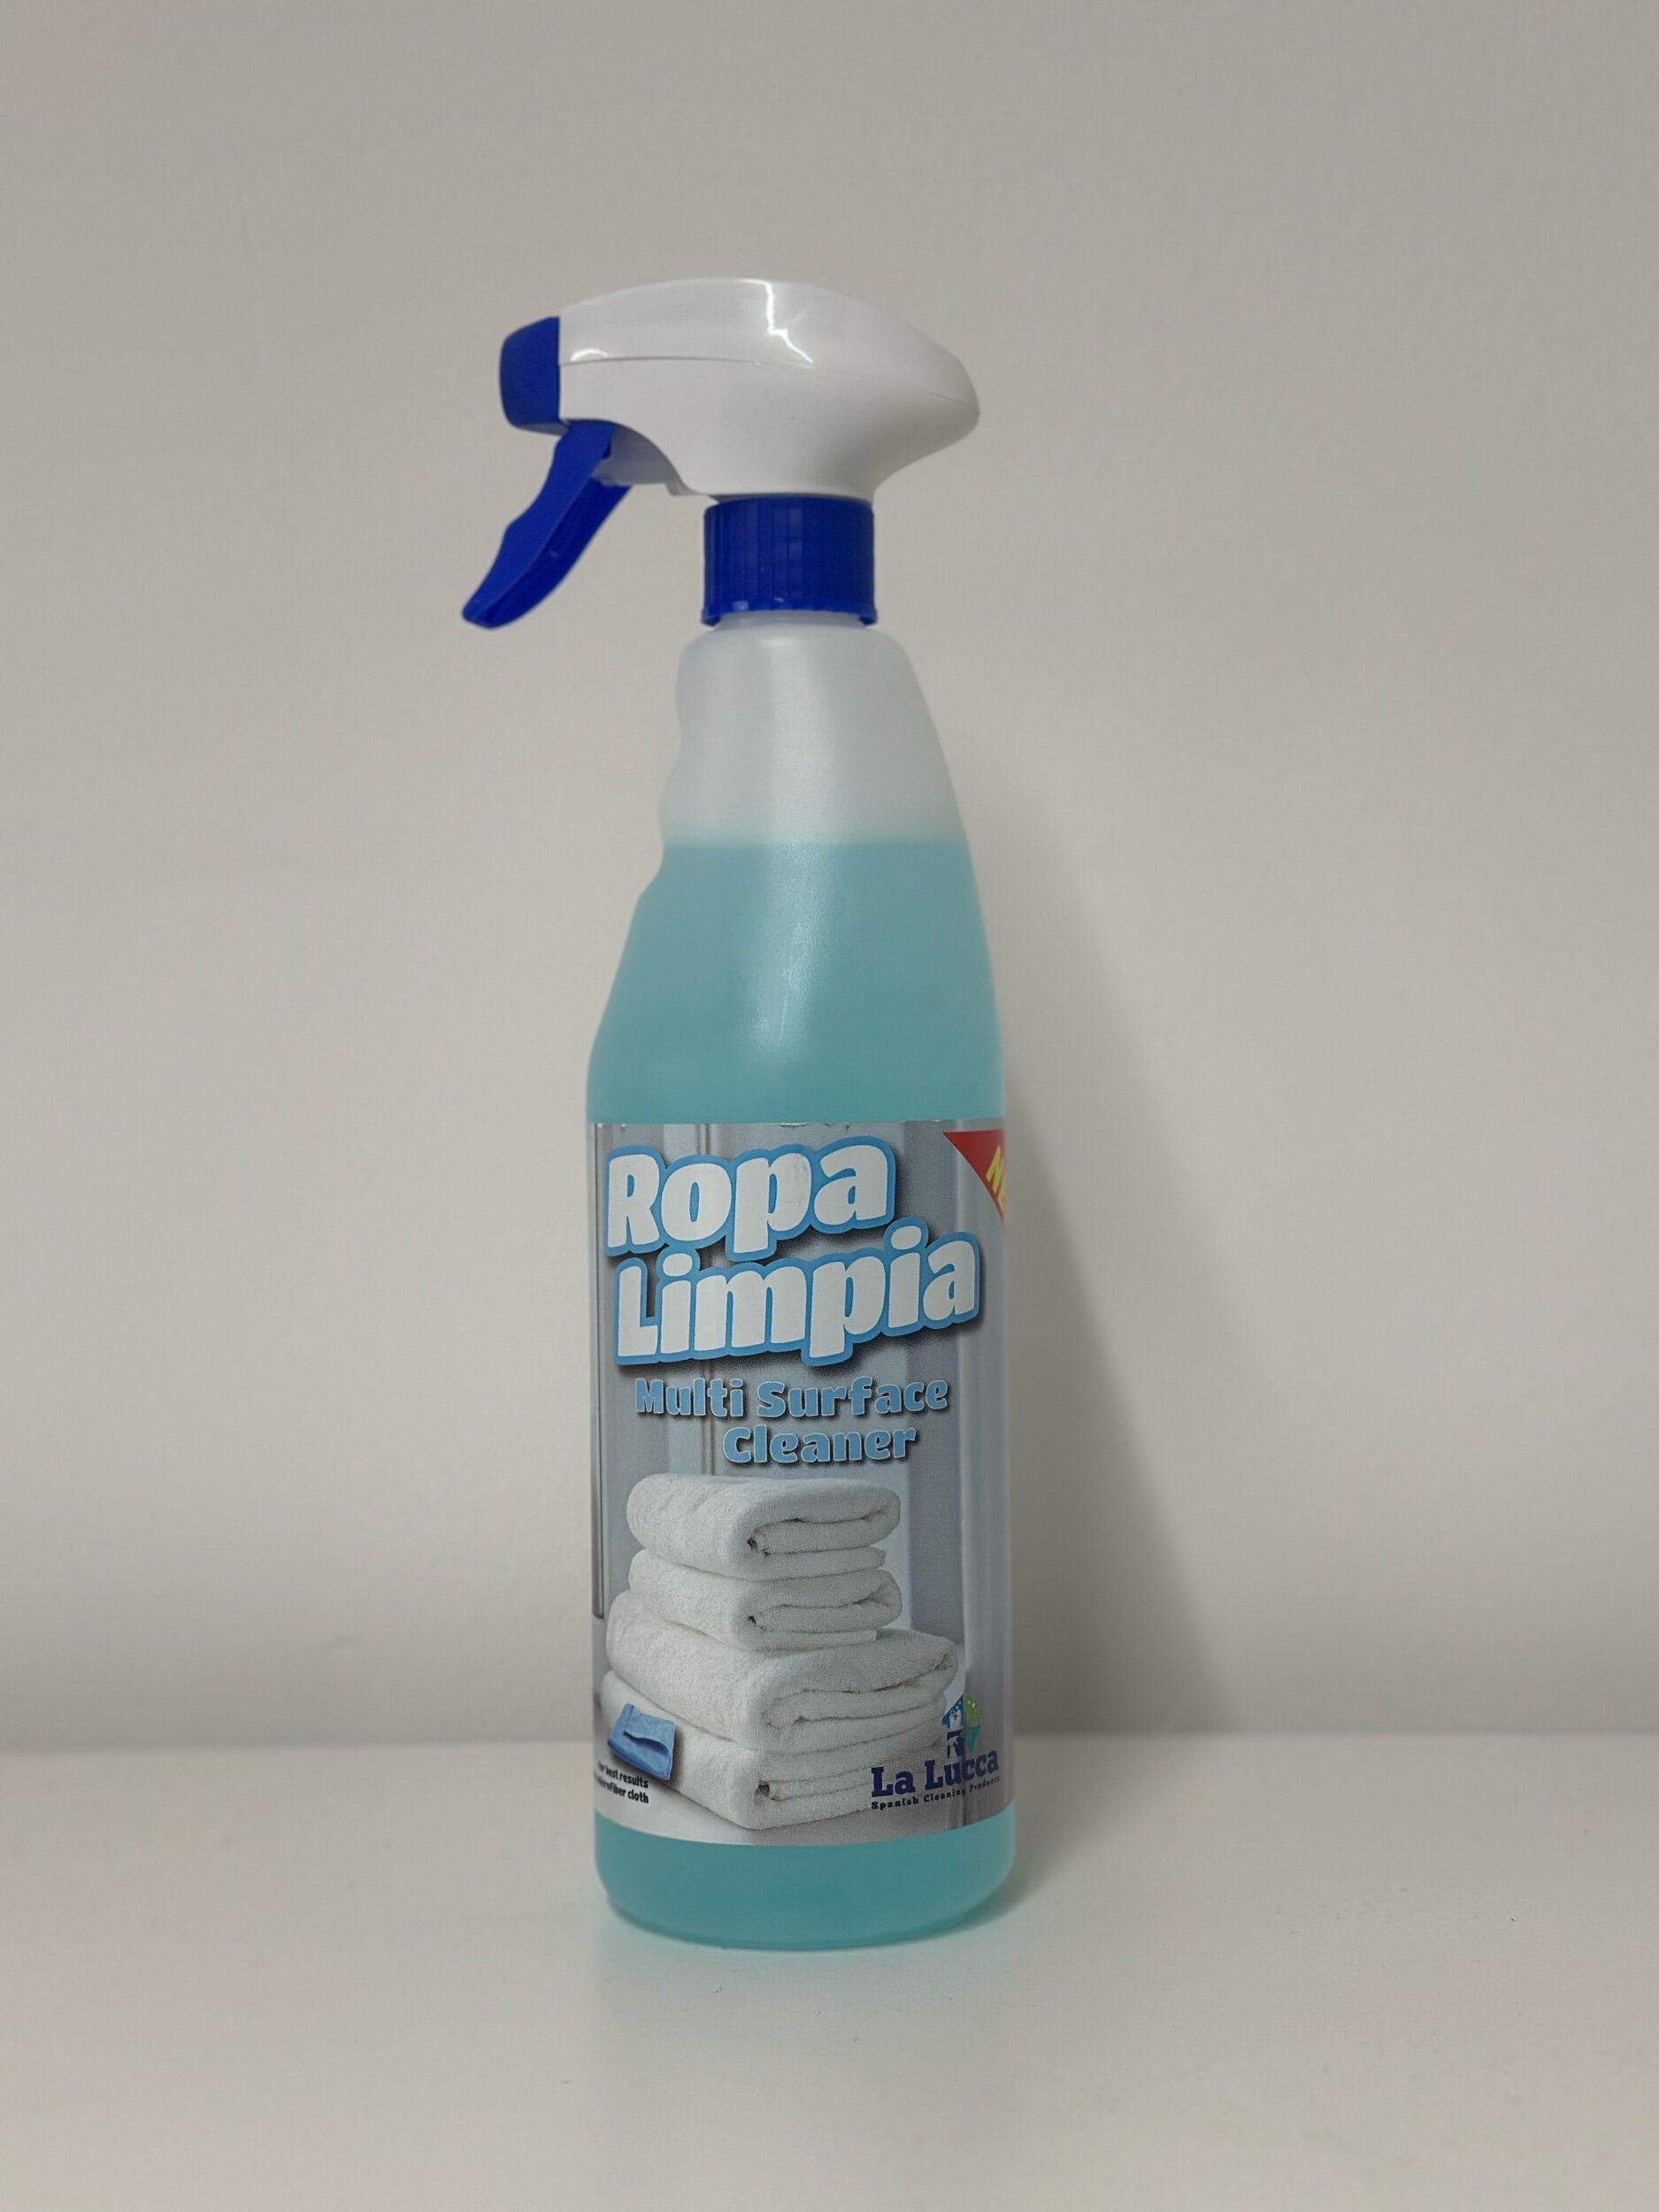 Floor Cleaners – That Spanish Sparkle